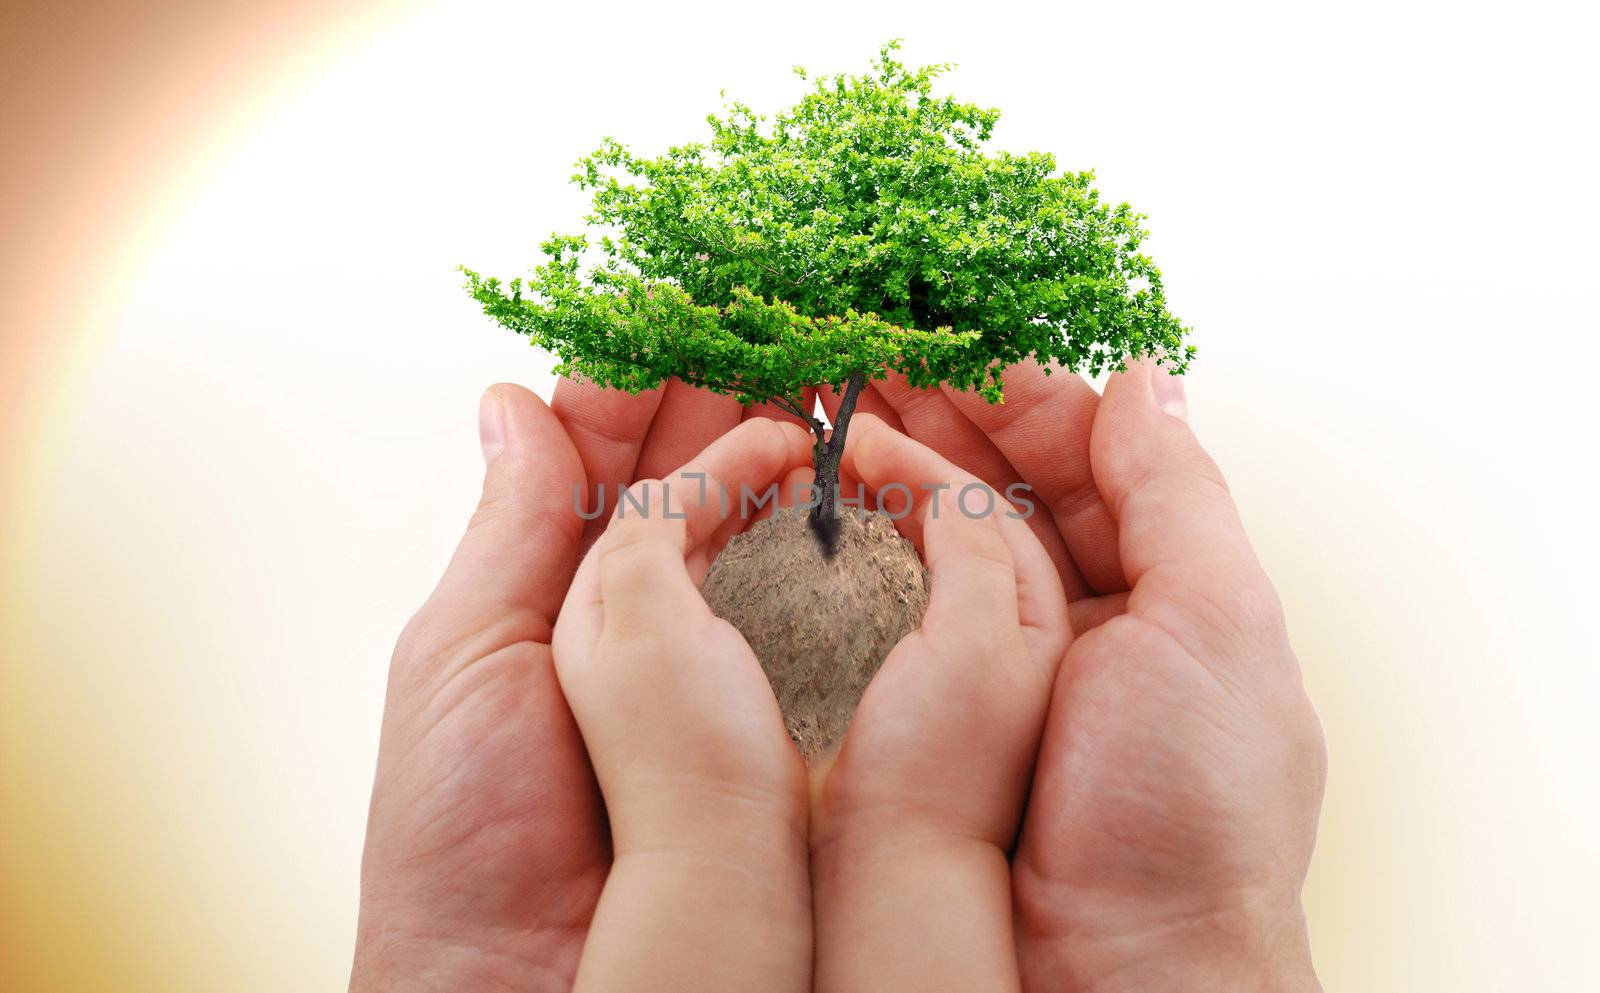 A green tree in the baby's and man's hand